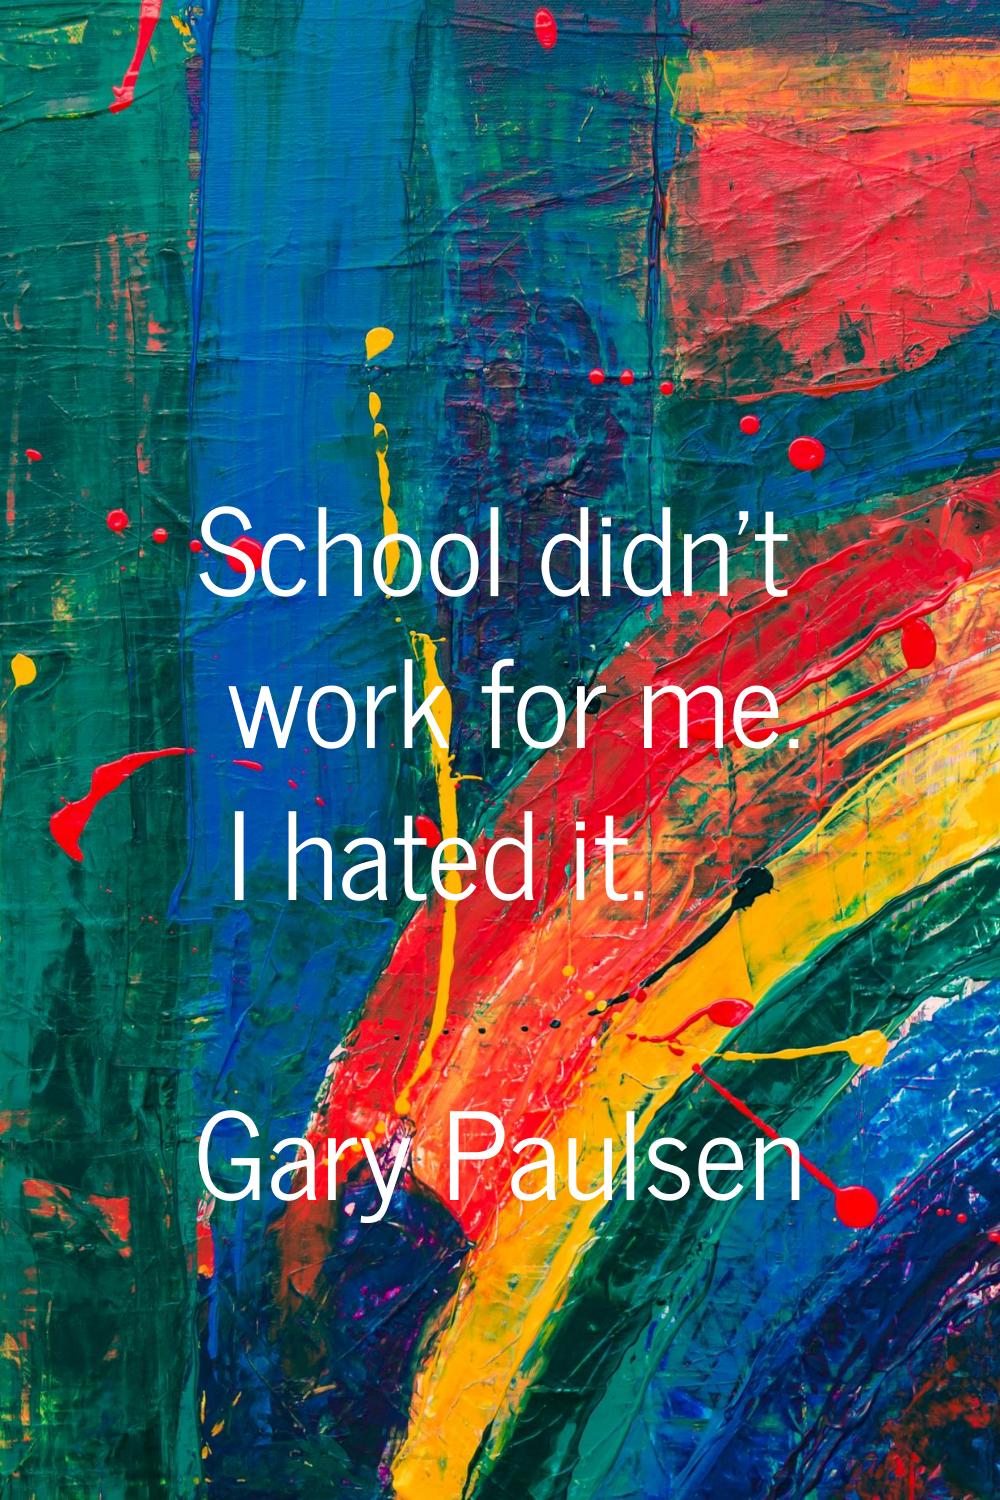 School didn't work for me. I hated it.